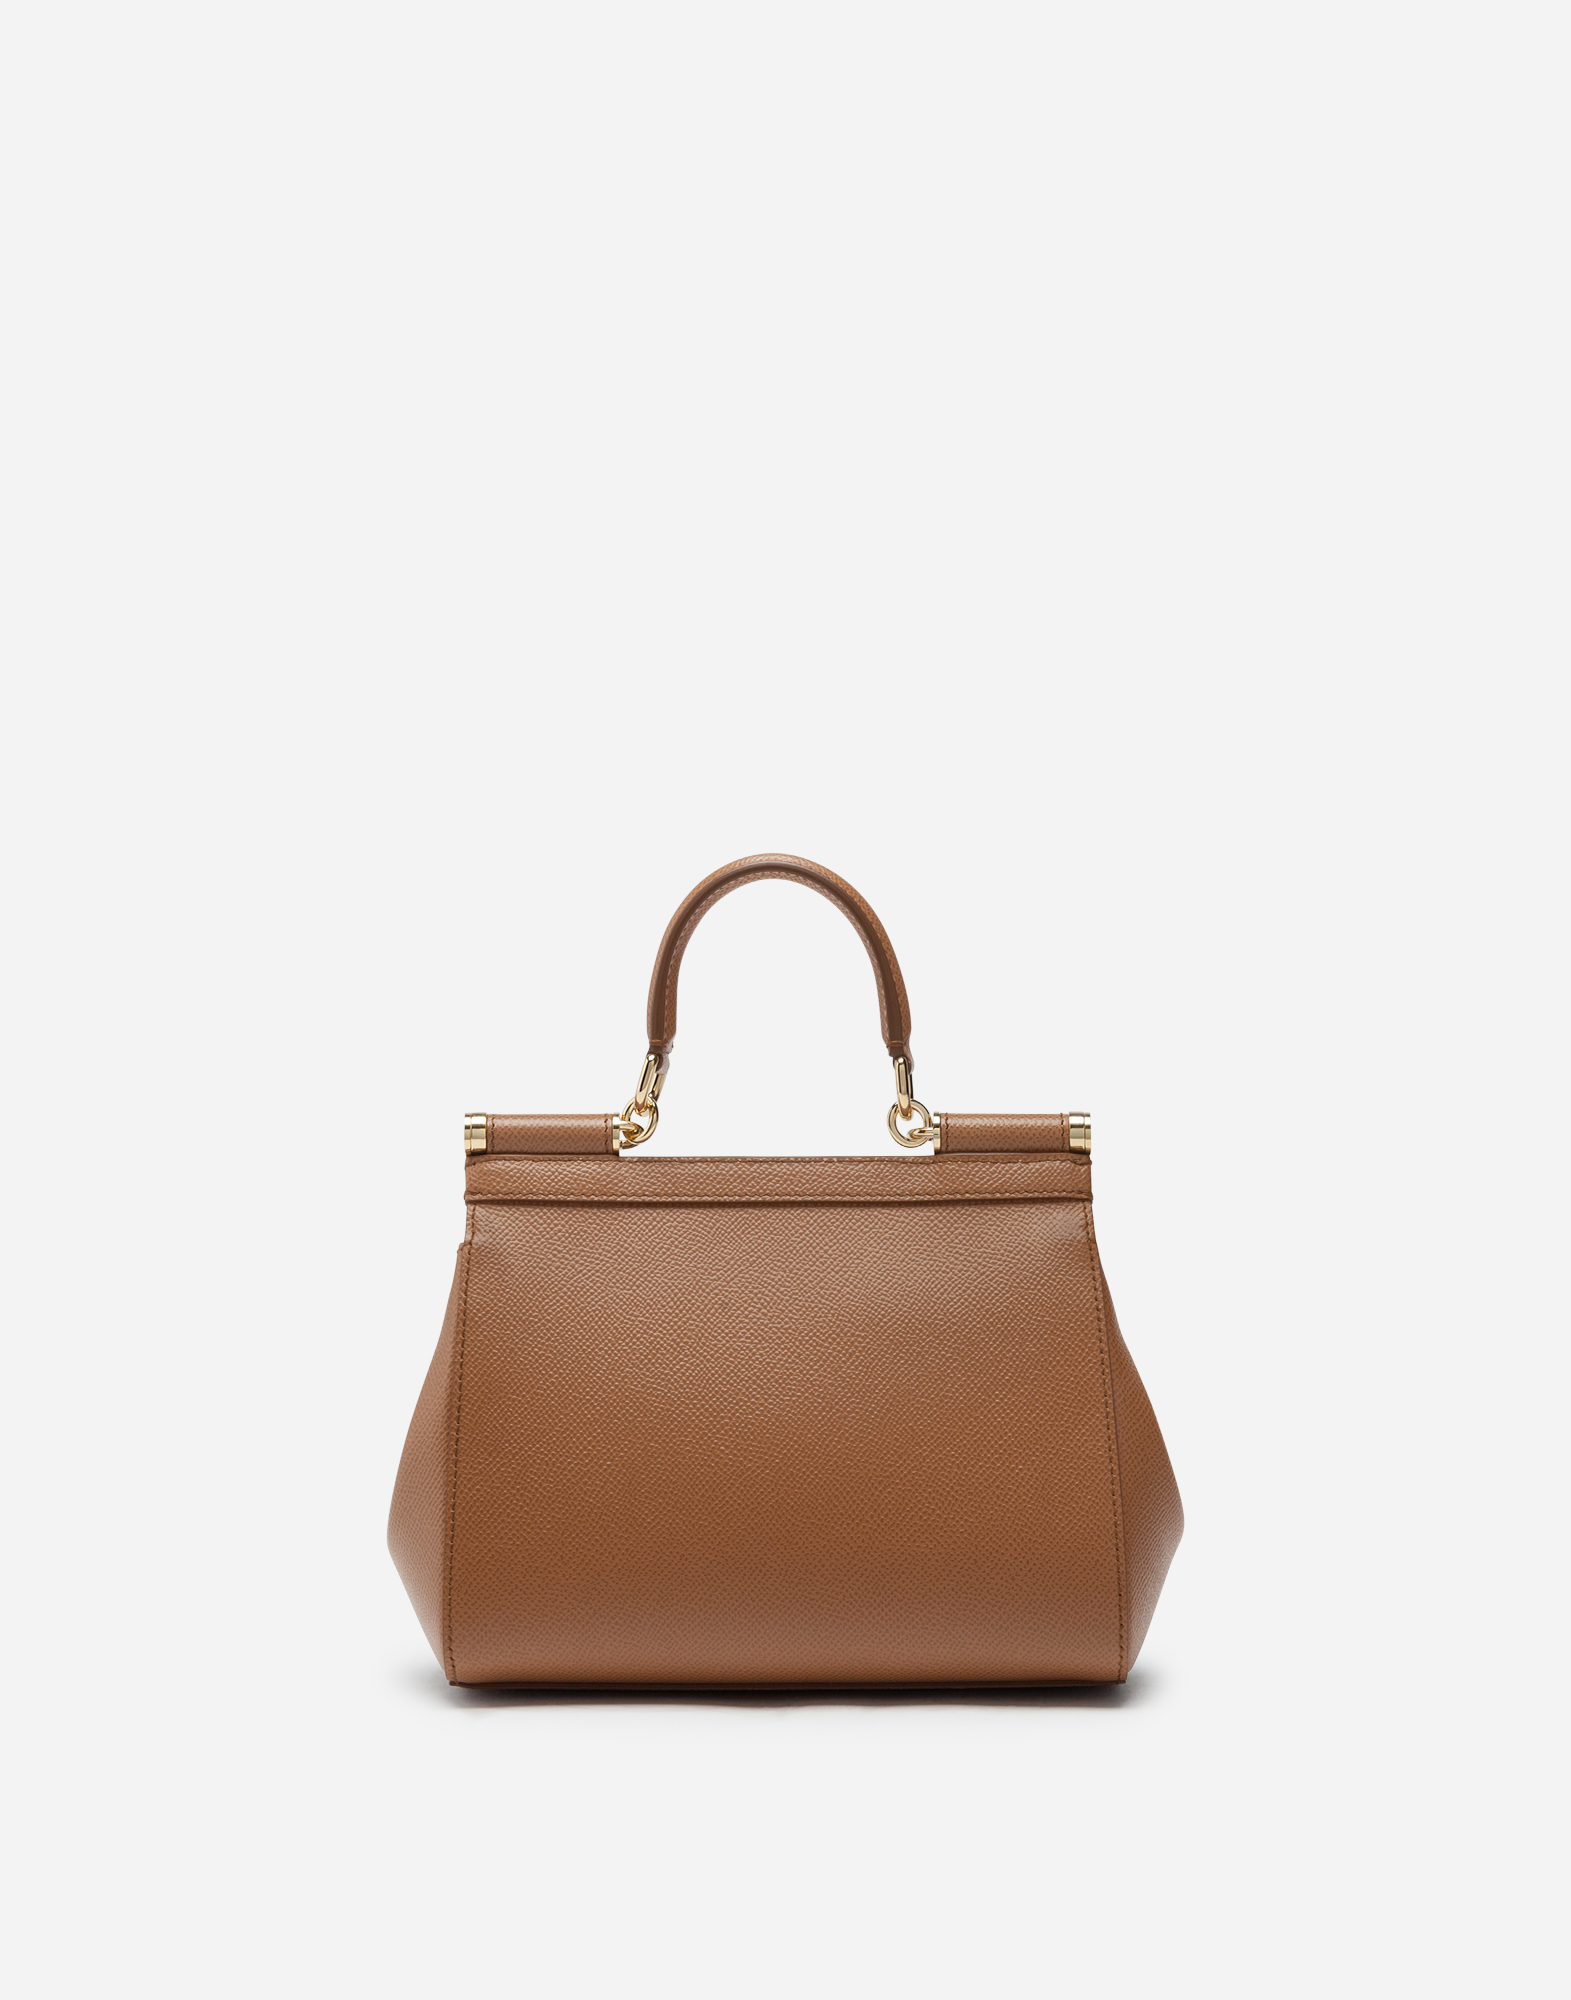 Dolce & Gabbana - Small Sicily Bag in Dauphine Leather